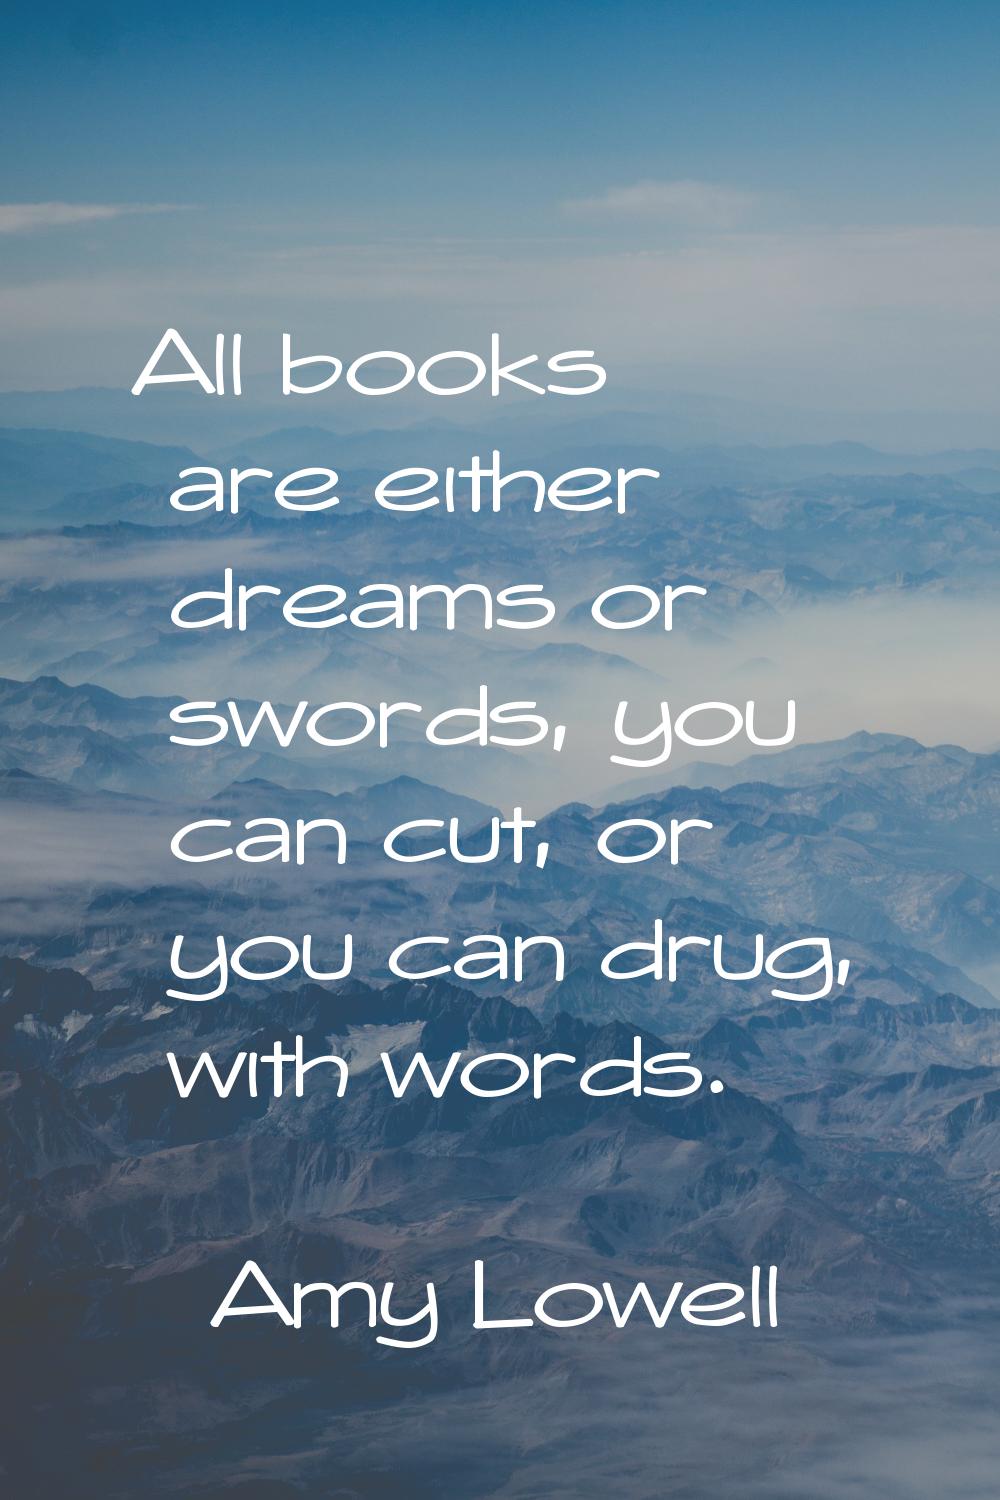 All books are either dreams or swords, you can cut, or you can drug, with words.